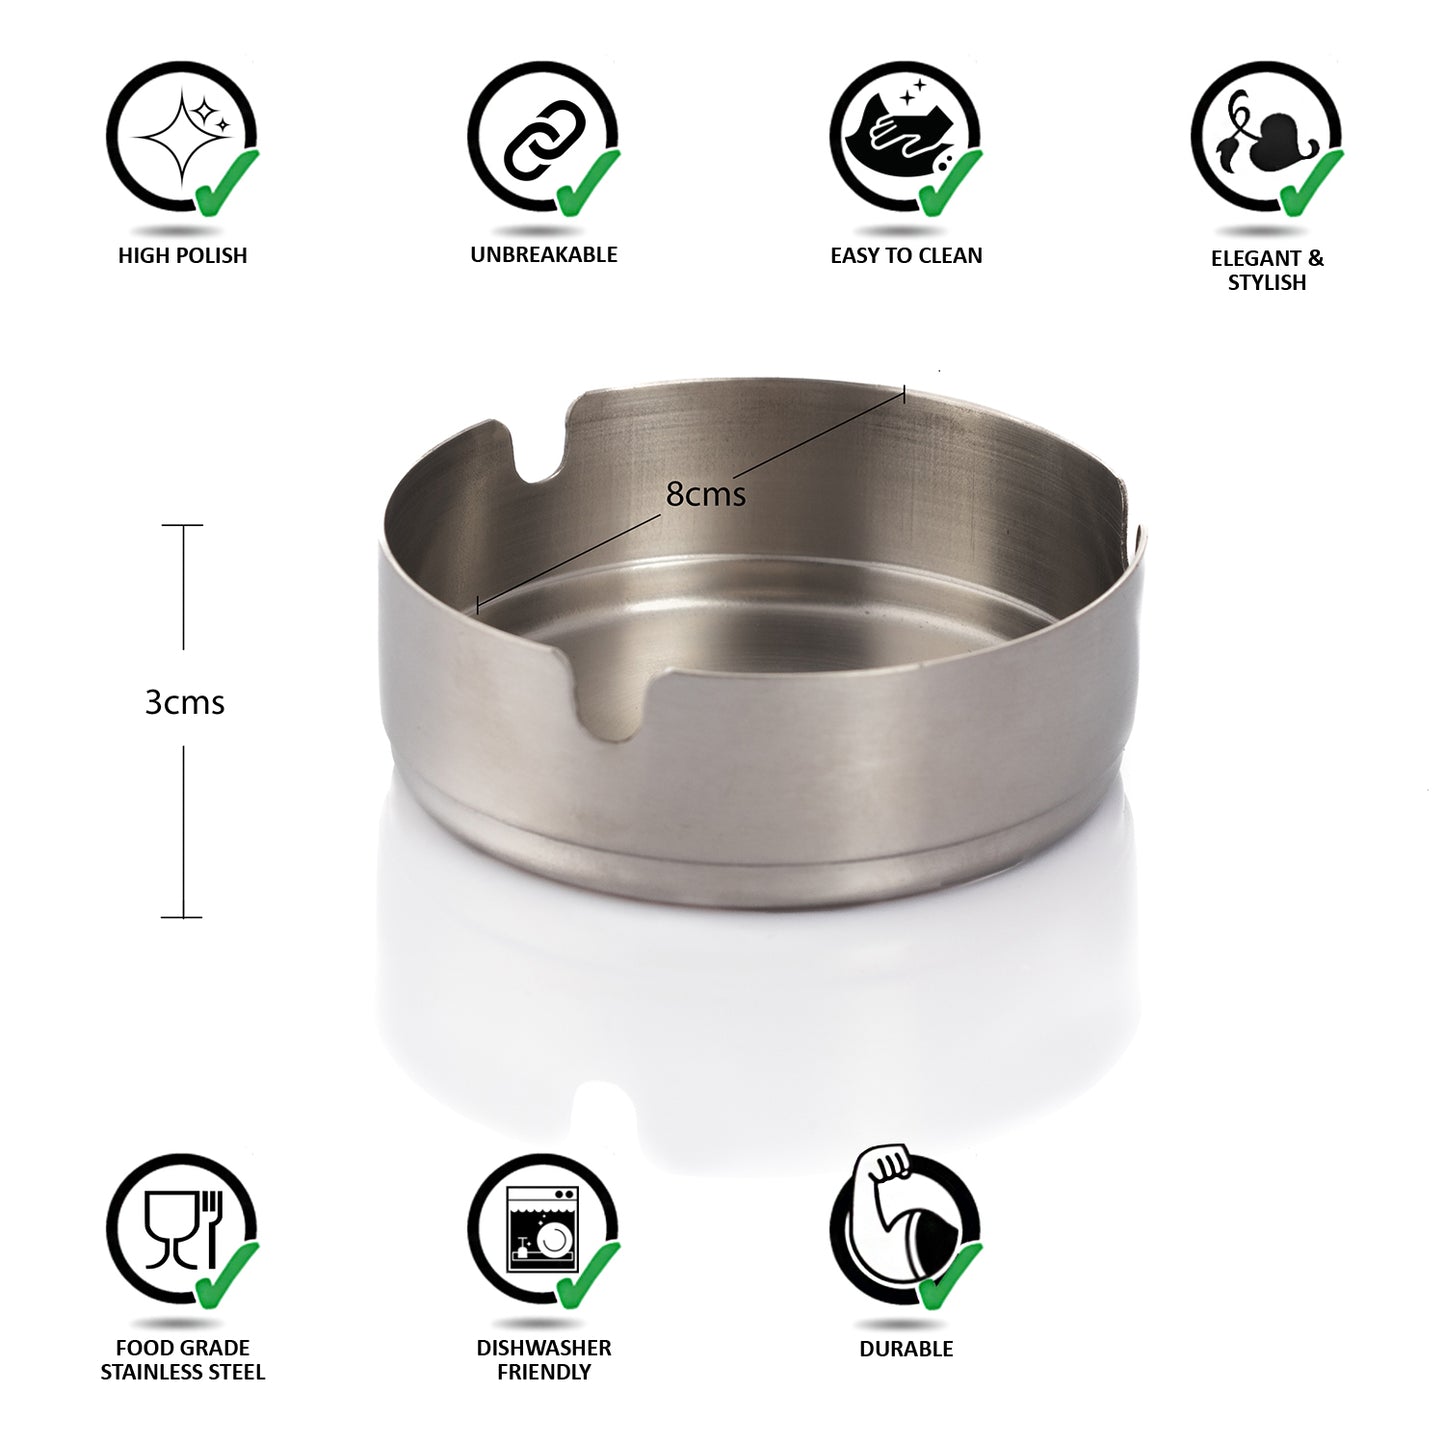 8cm Stainless Steel Ashtray Round